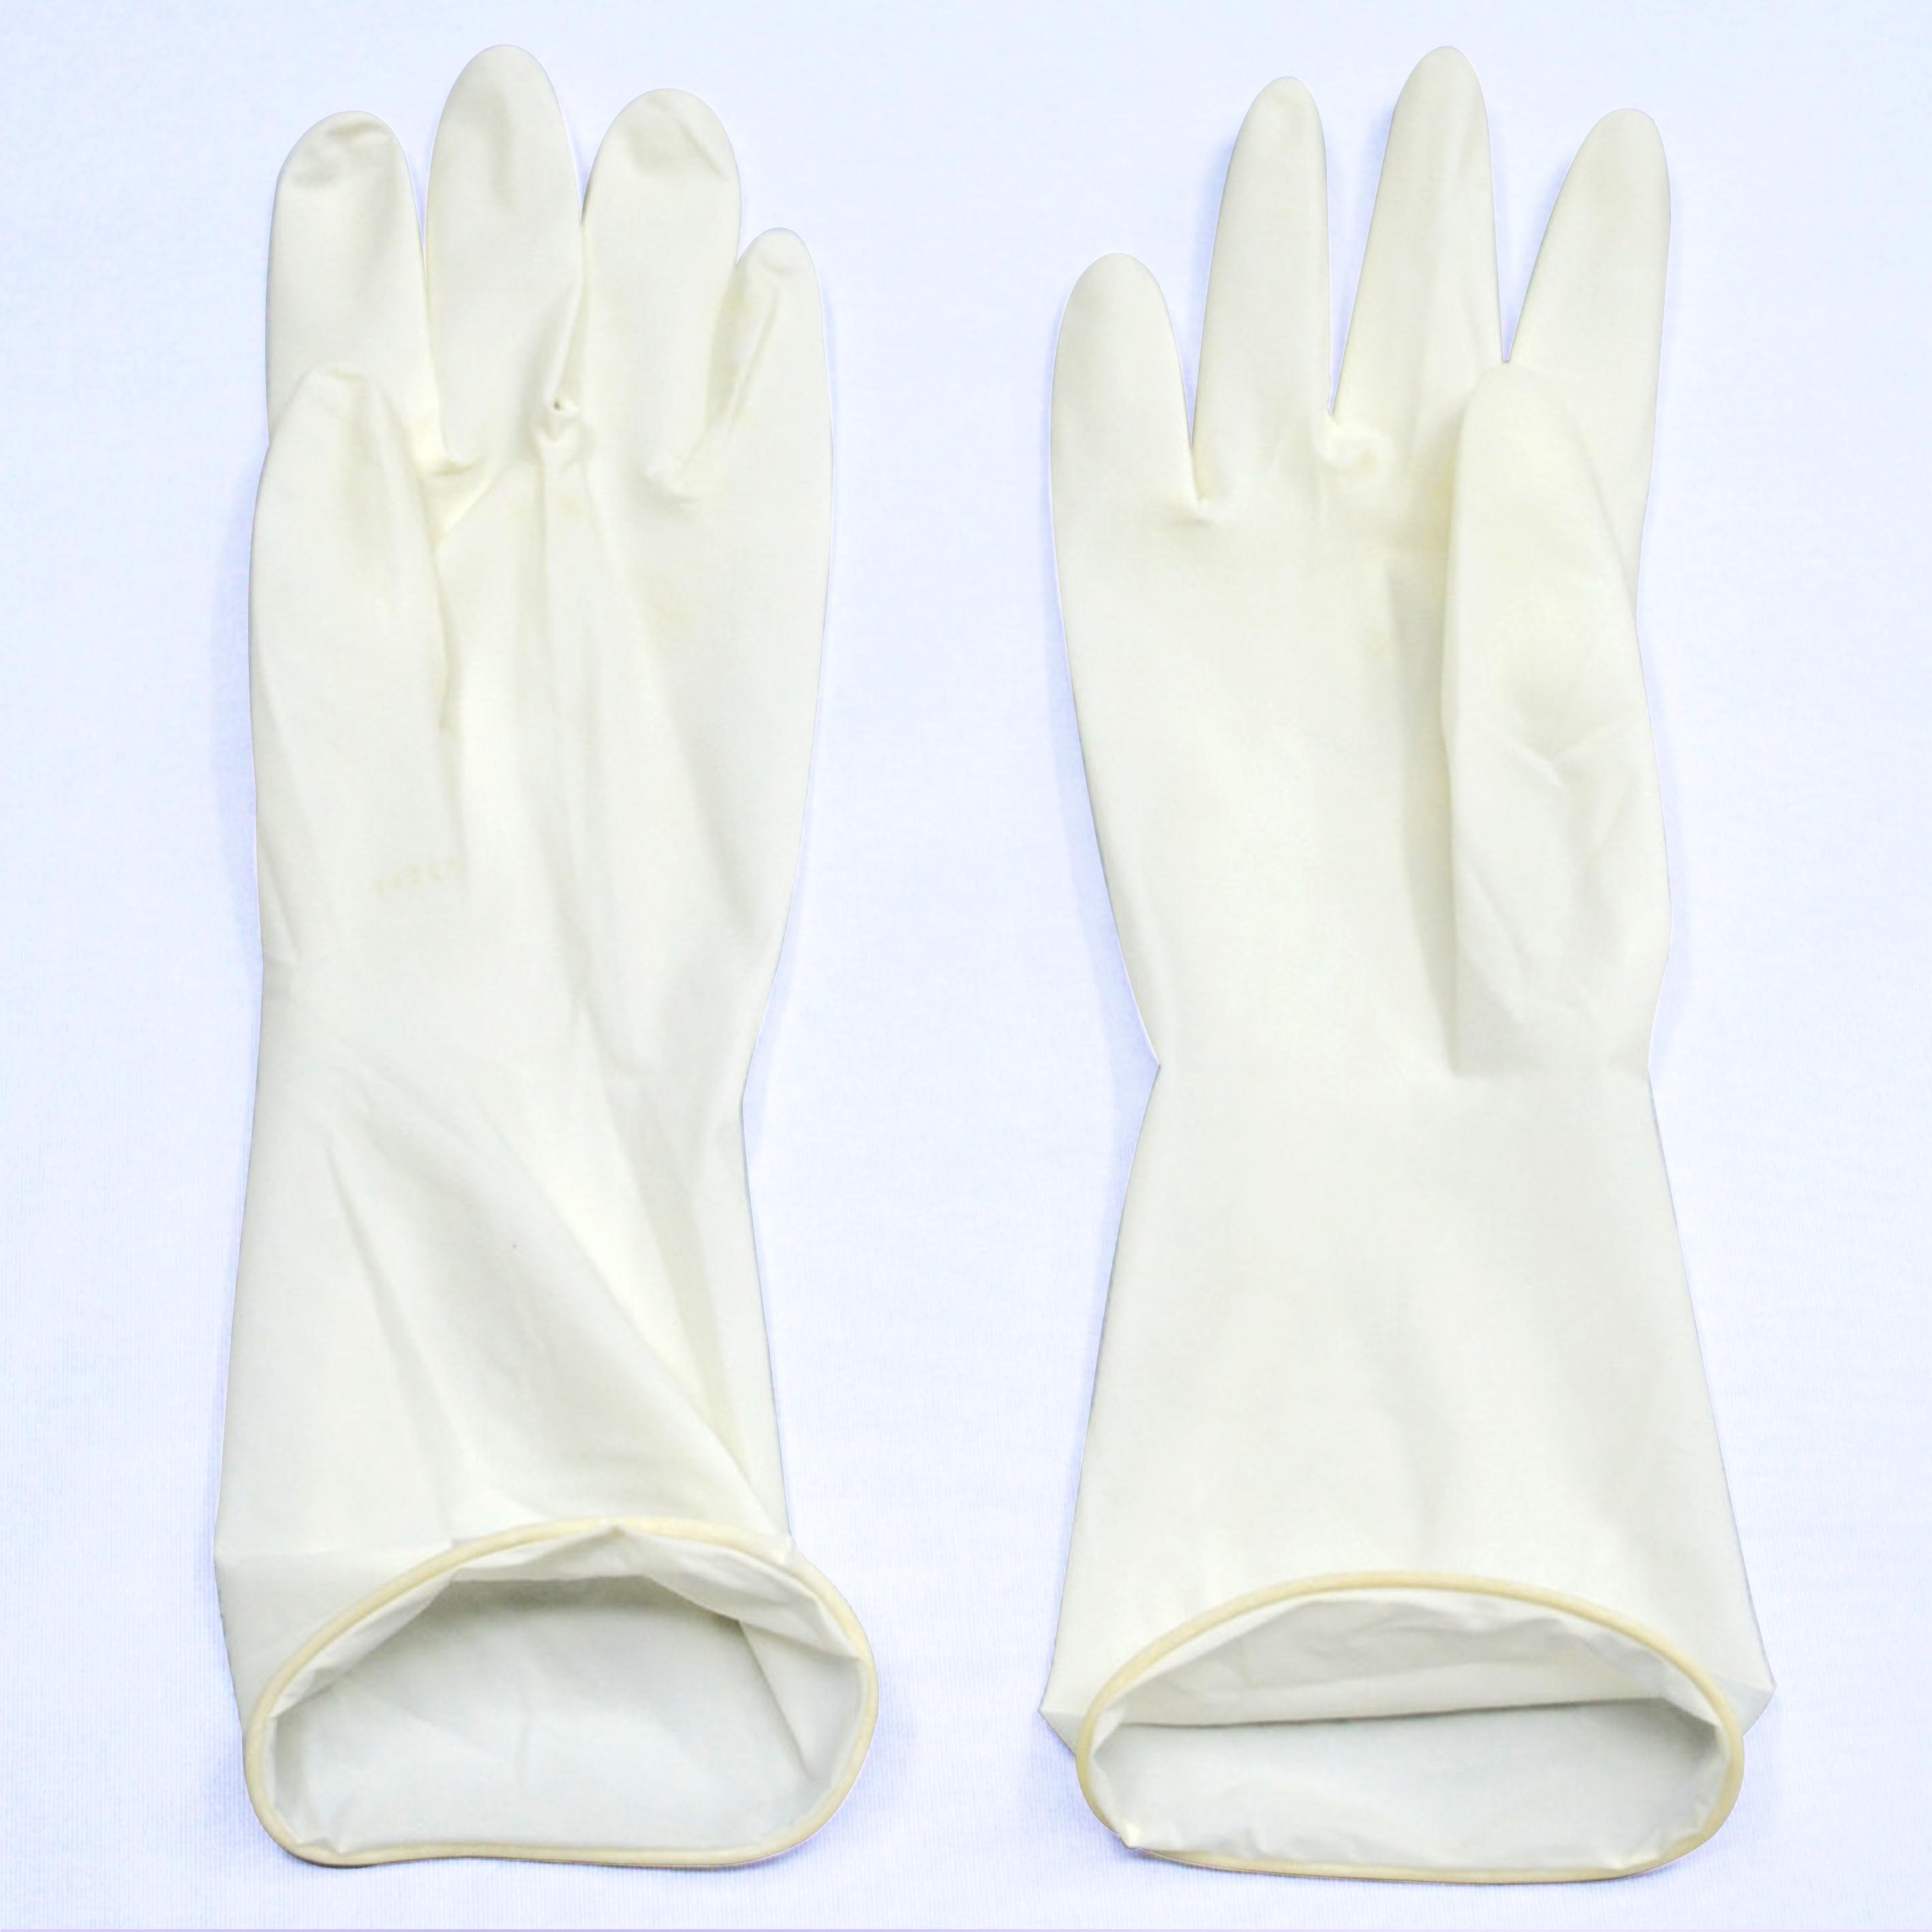 Disposable Sterile Non Powdered Latex Surgical Gloves